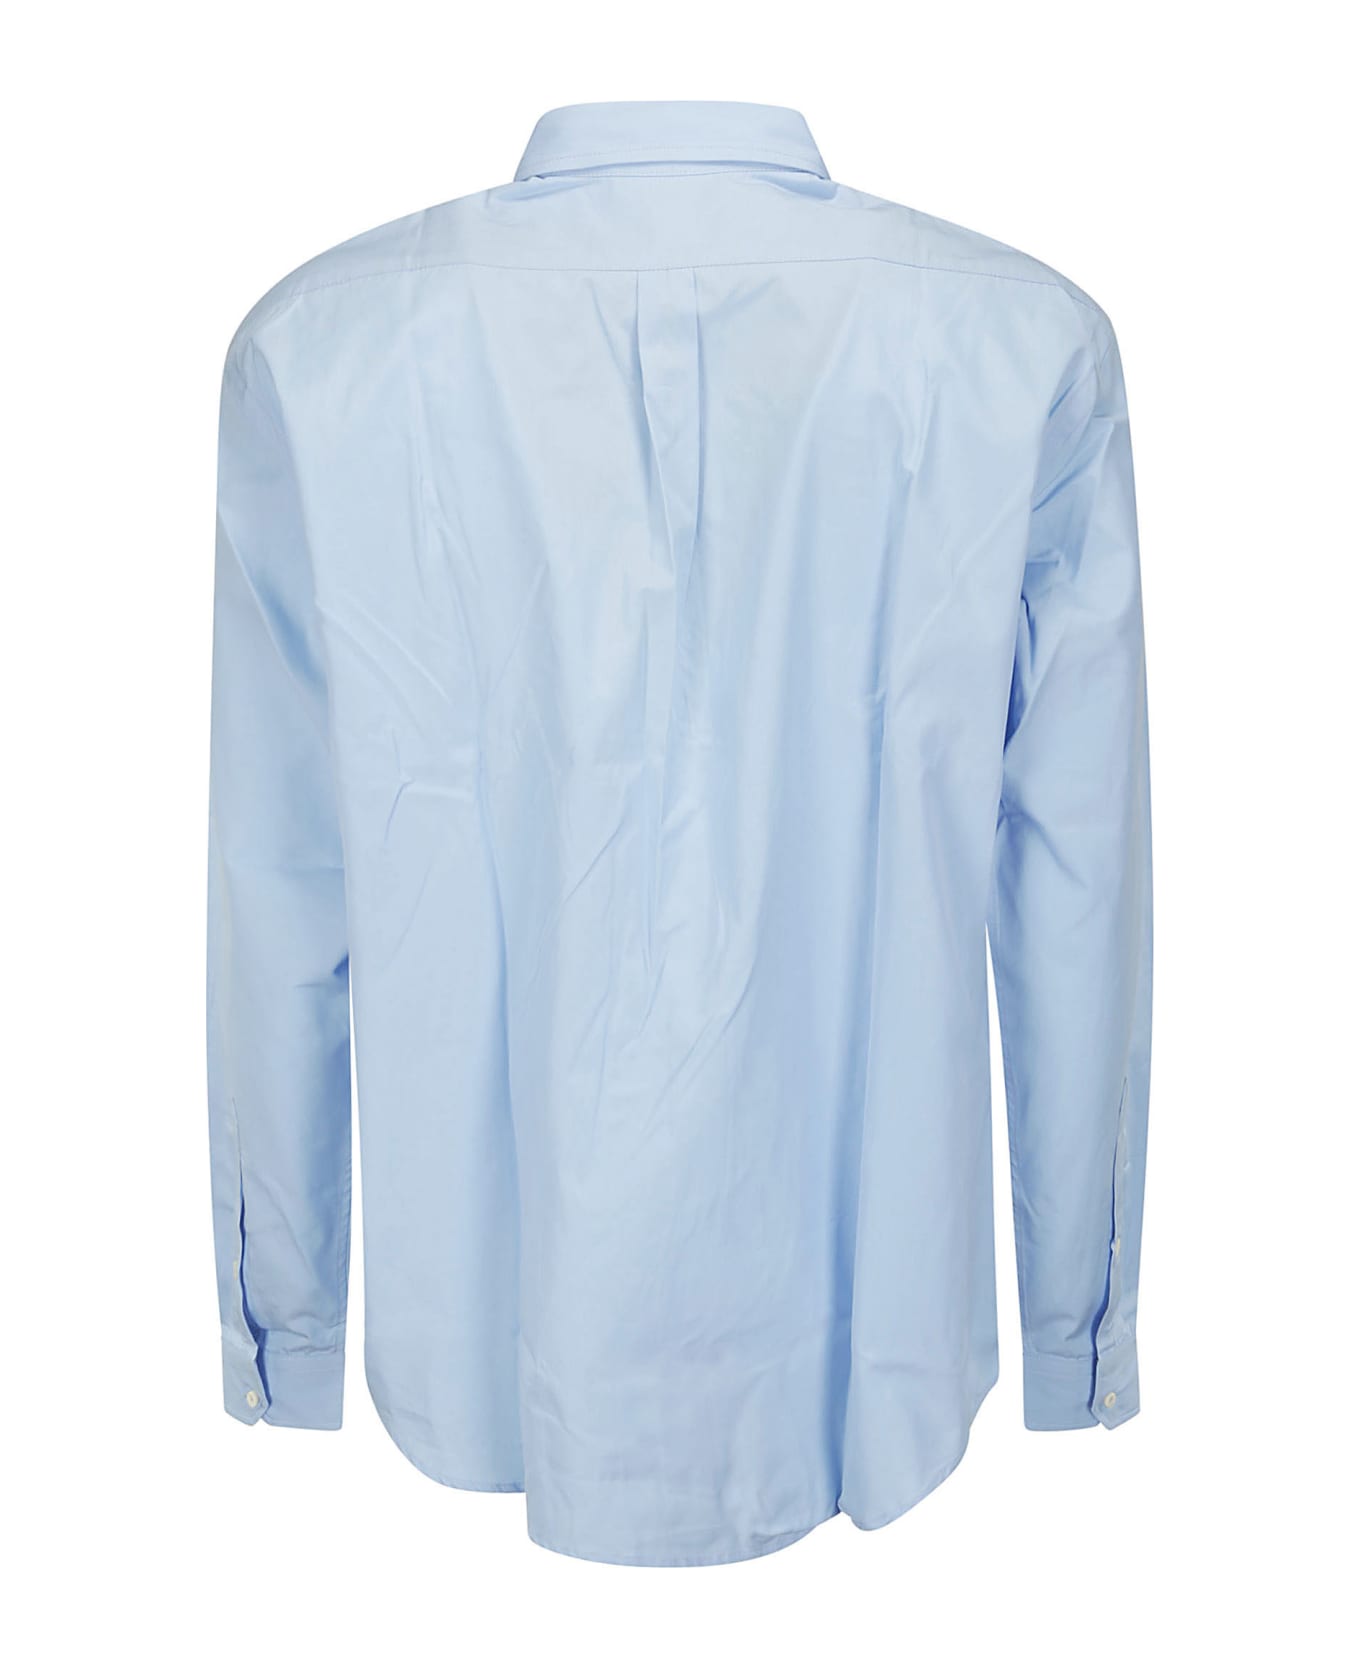 Y/Project Evergreen Pinched Logo Shirt - LIGHT BLUE